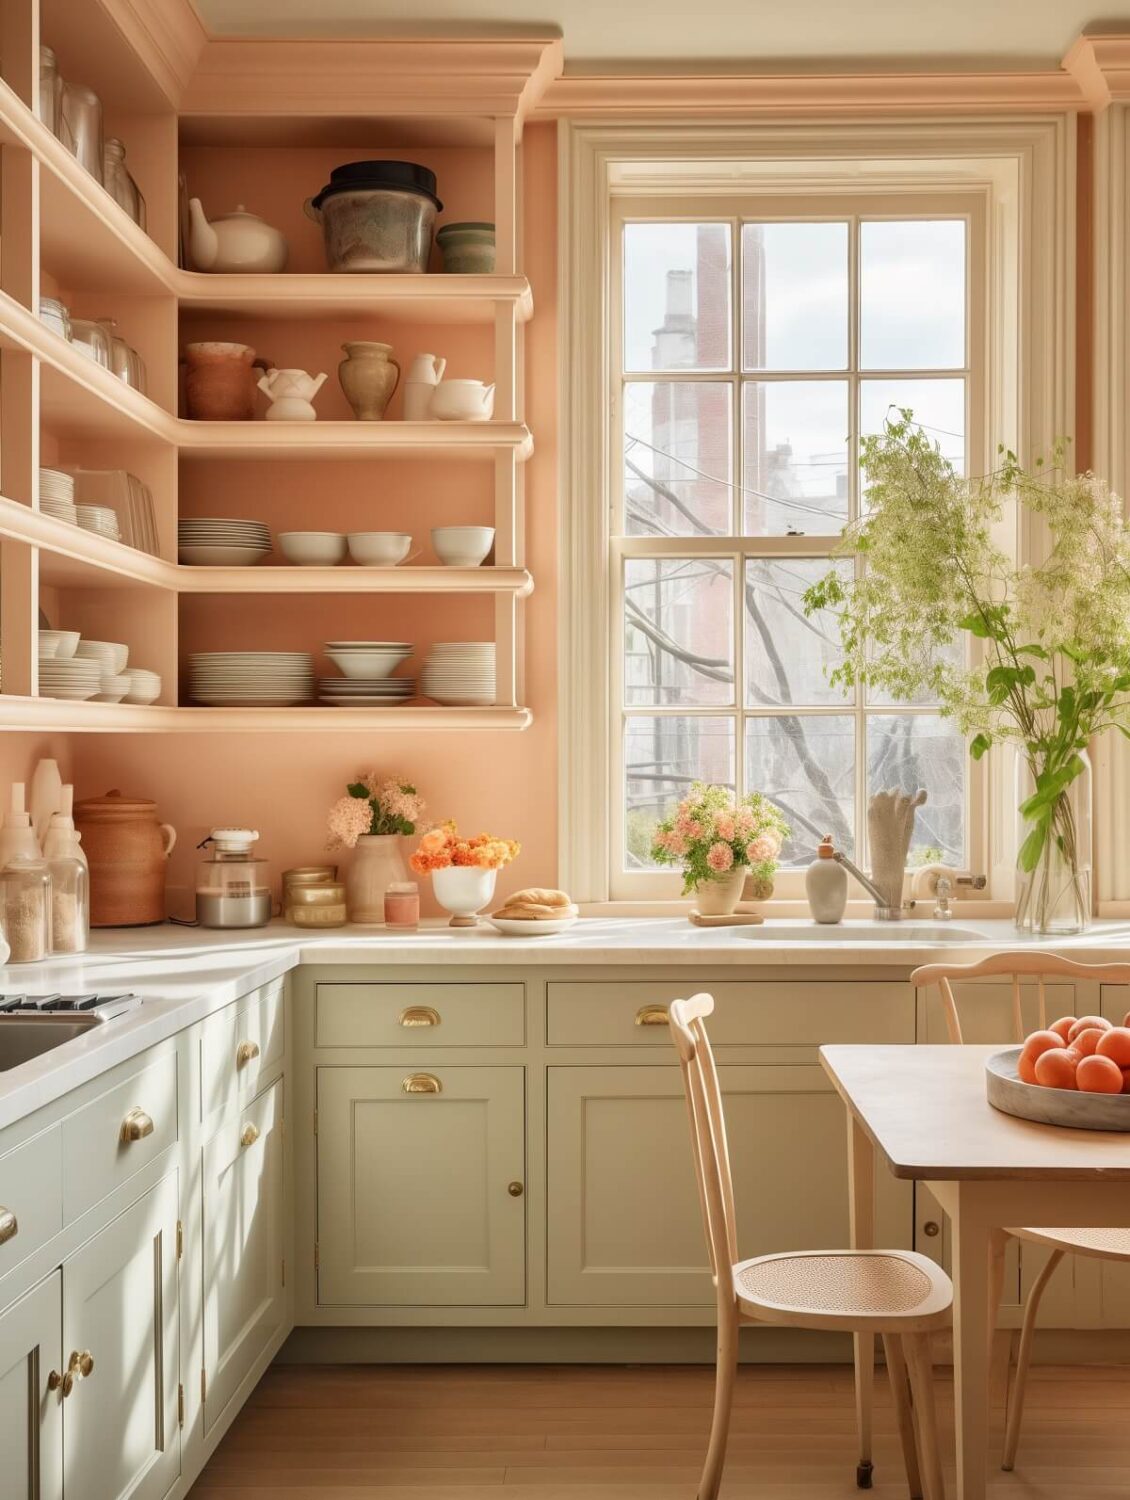 kitchen with peach walls and open cabinets nordroom